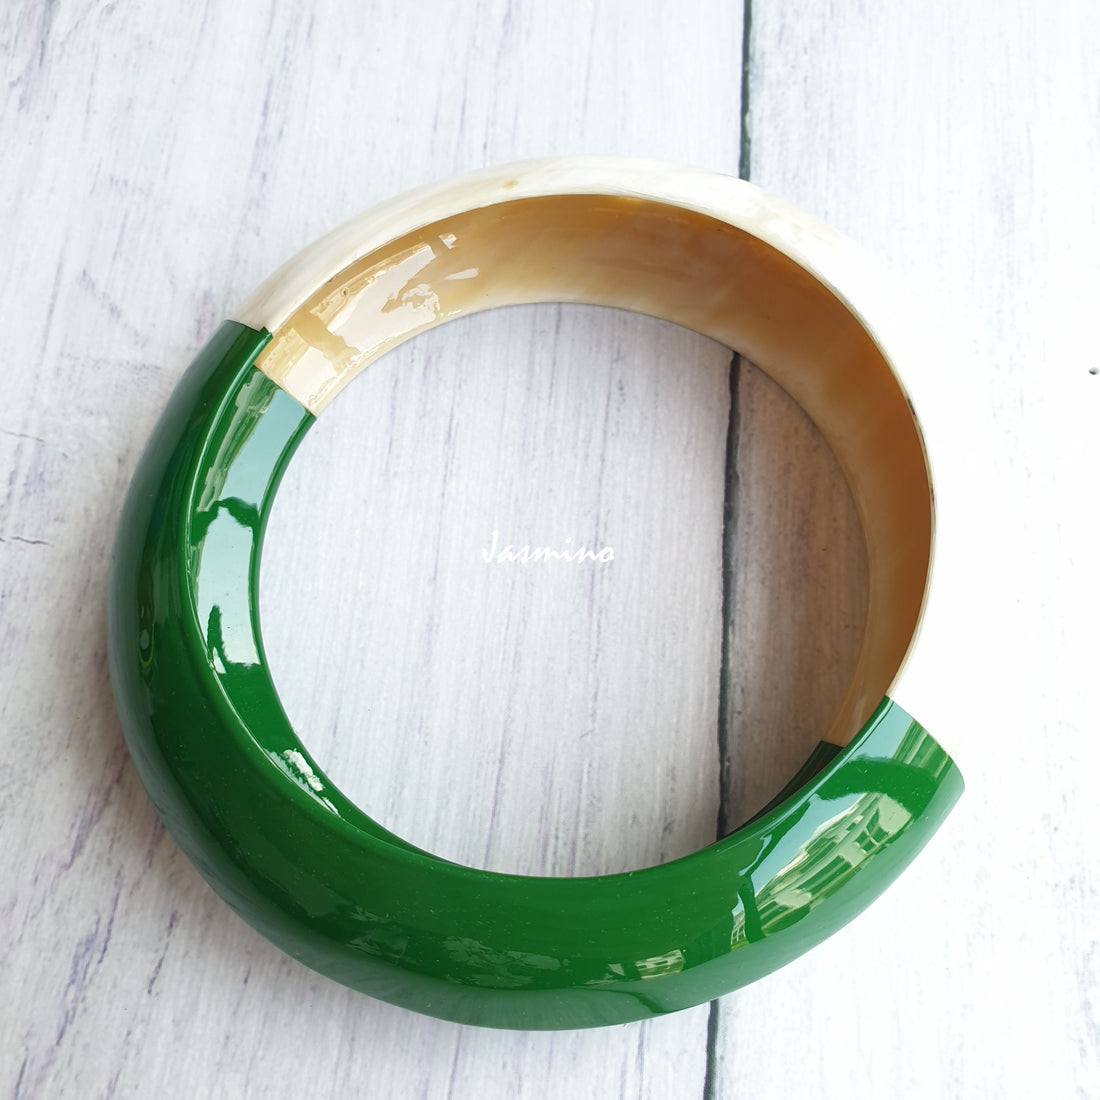 Jasmino unique handmade bangle bracelet is detailed by a green half and a white half in natural buffalo horn for Christmas gifts